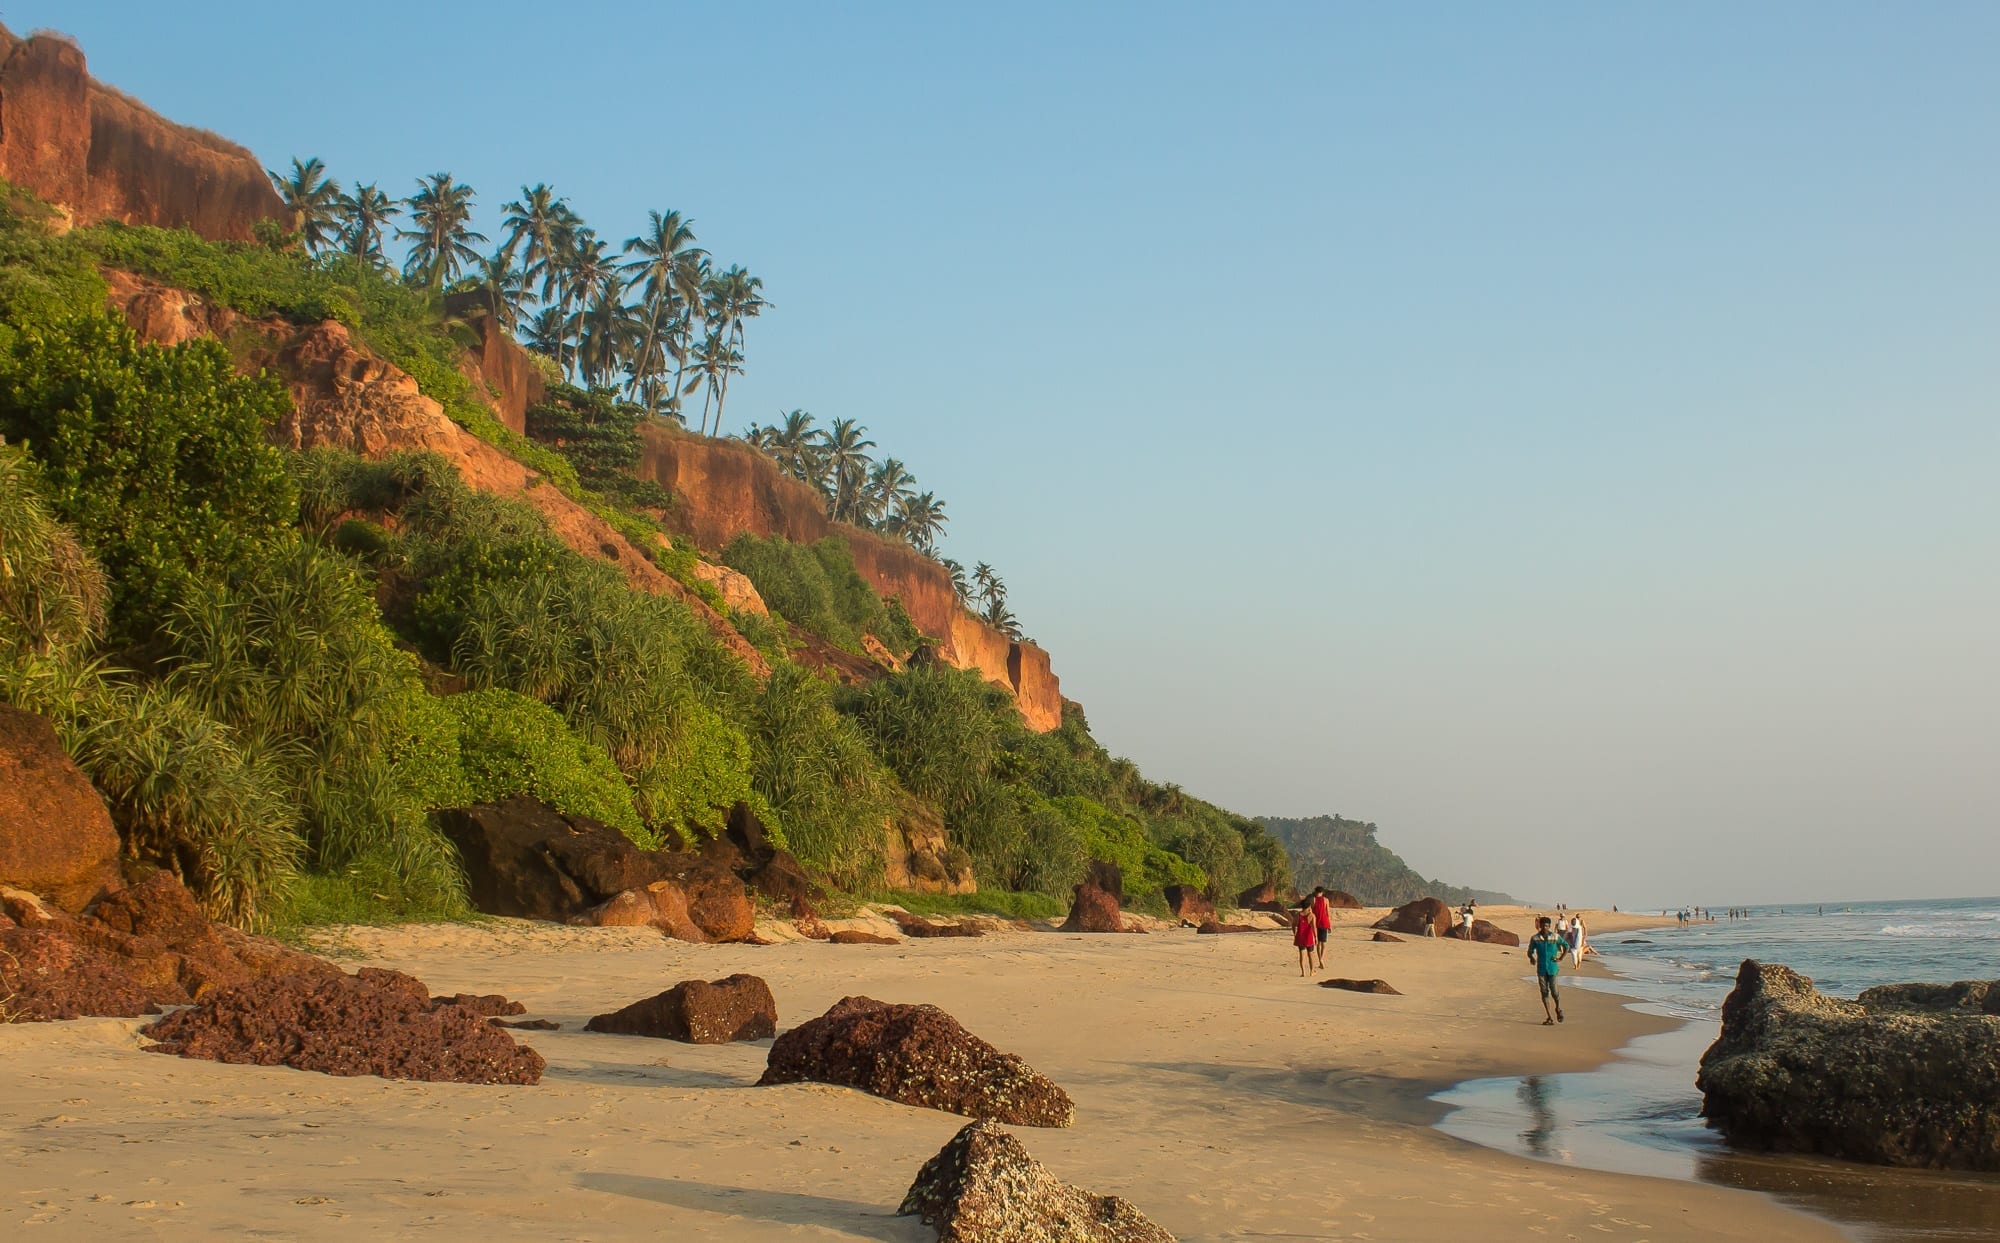 Cliffs and beach leading into the ocean in Varkala, Kerala, India, palm trees rising from the hills.